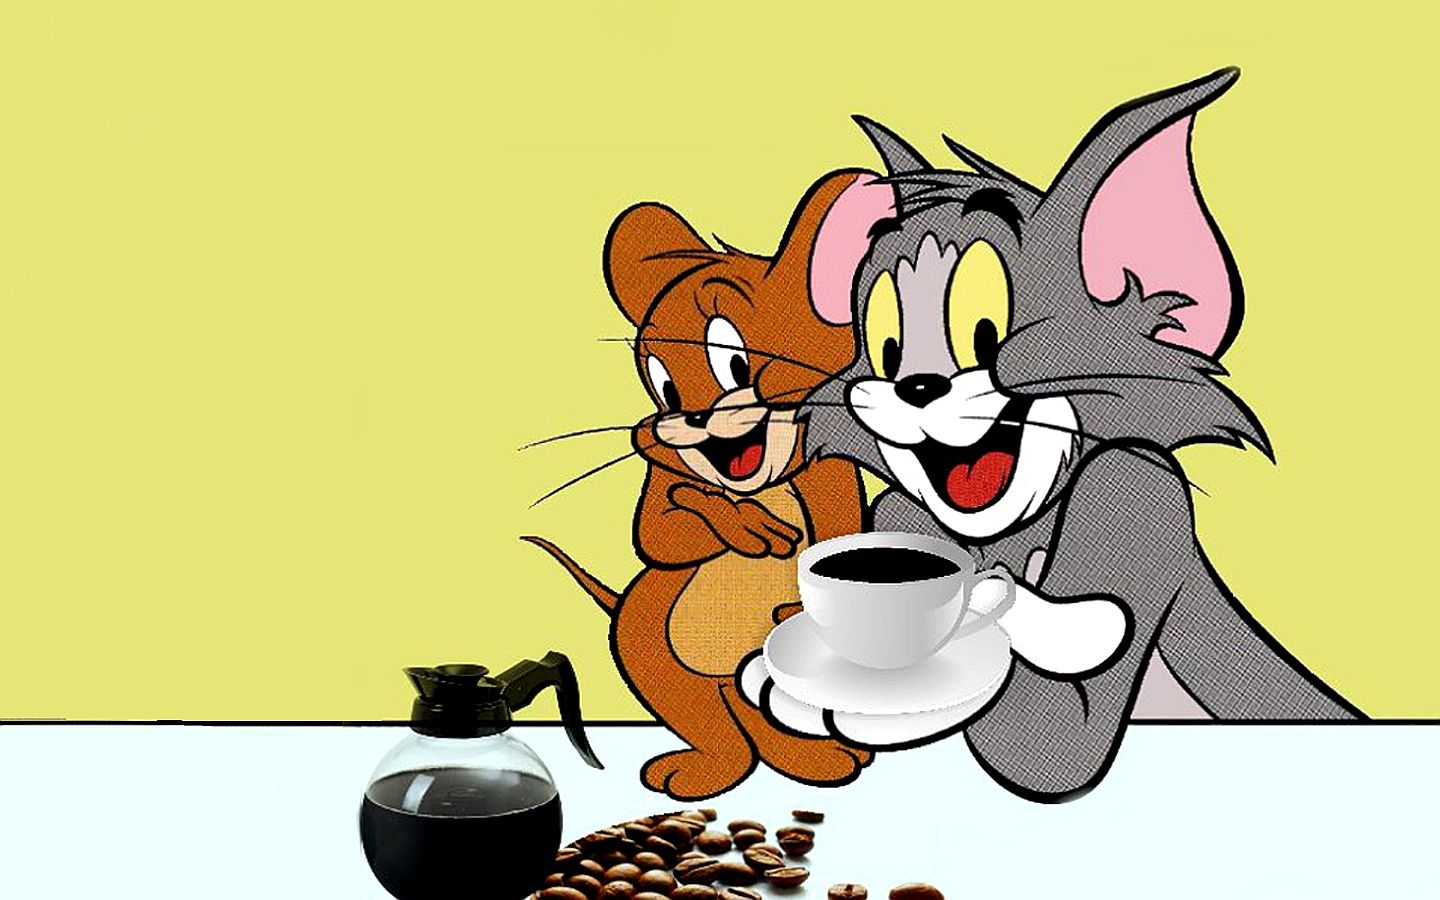 Tom and Jerry Wallpaper. Tom and Jerry